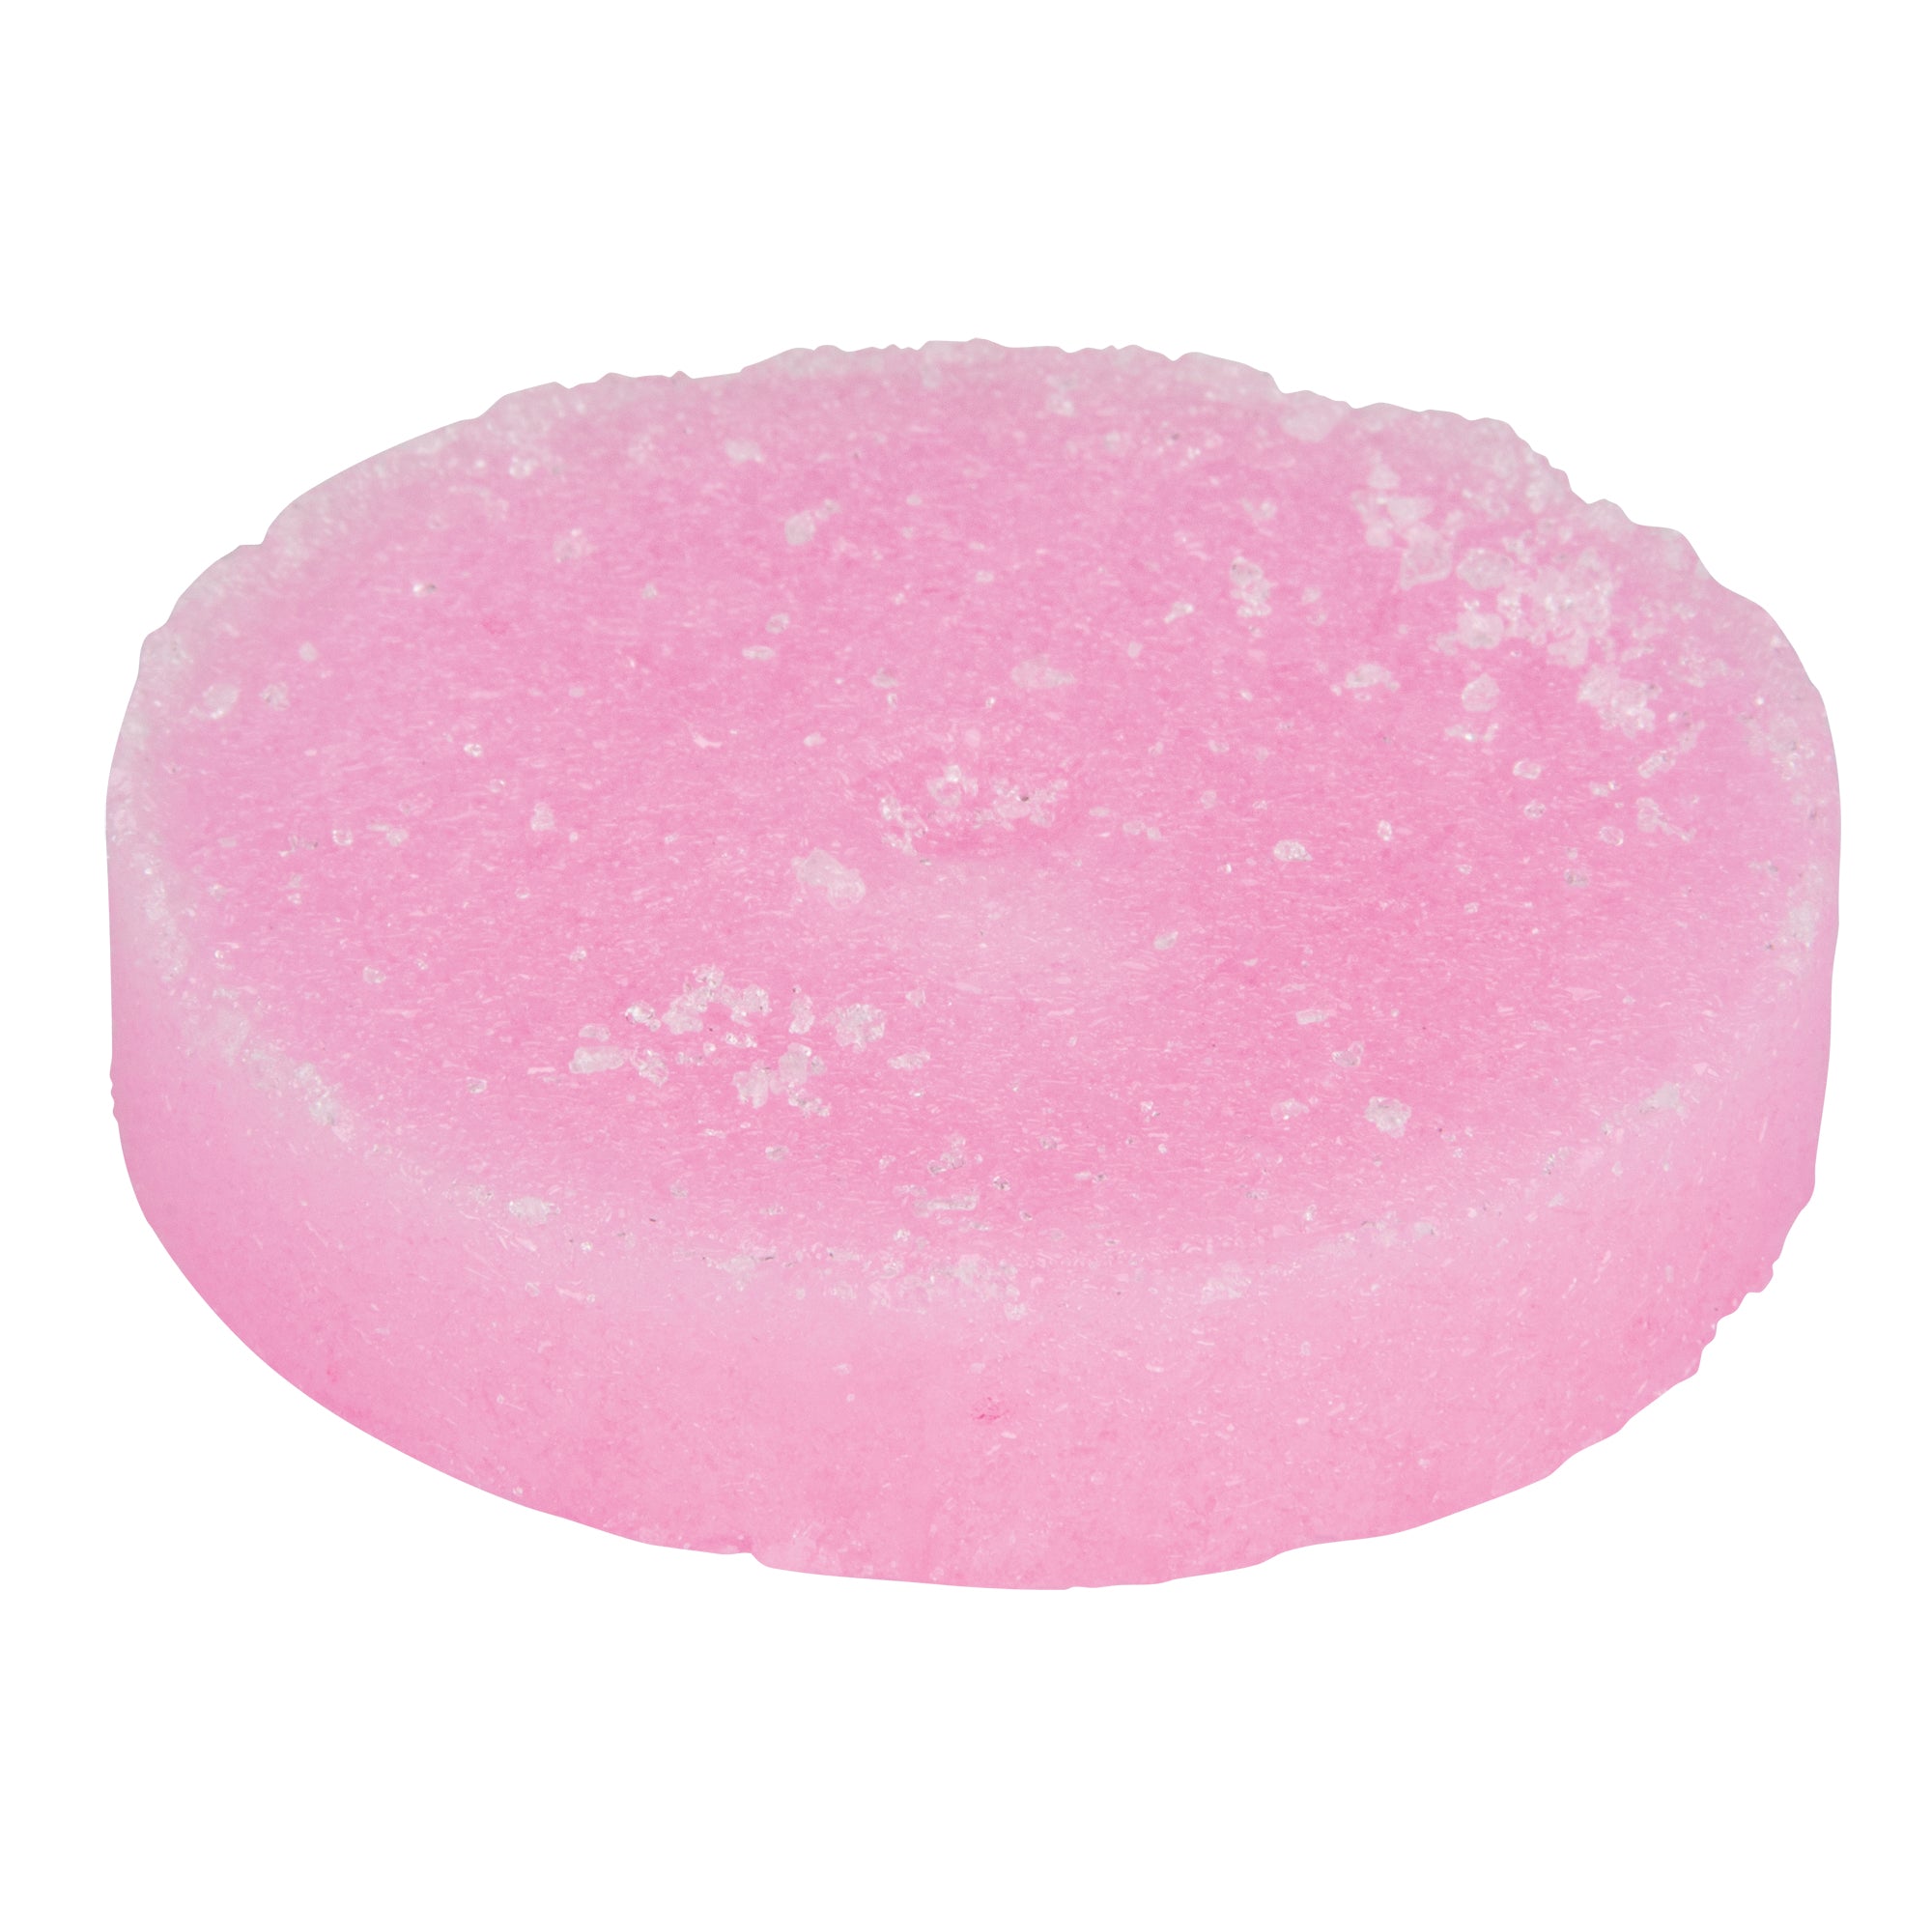 HOSPECO Cherry Scented Toss in Para Urinal Pucks - Pack of 12 Pucks